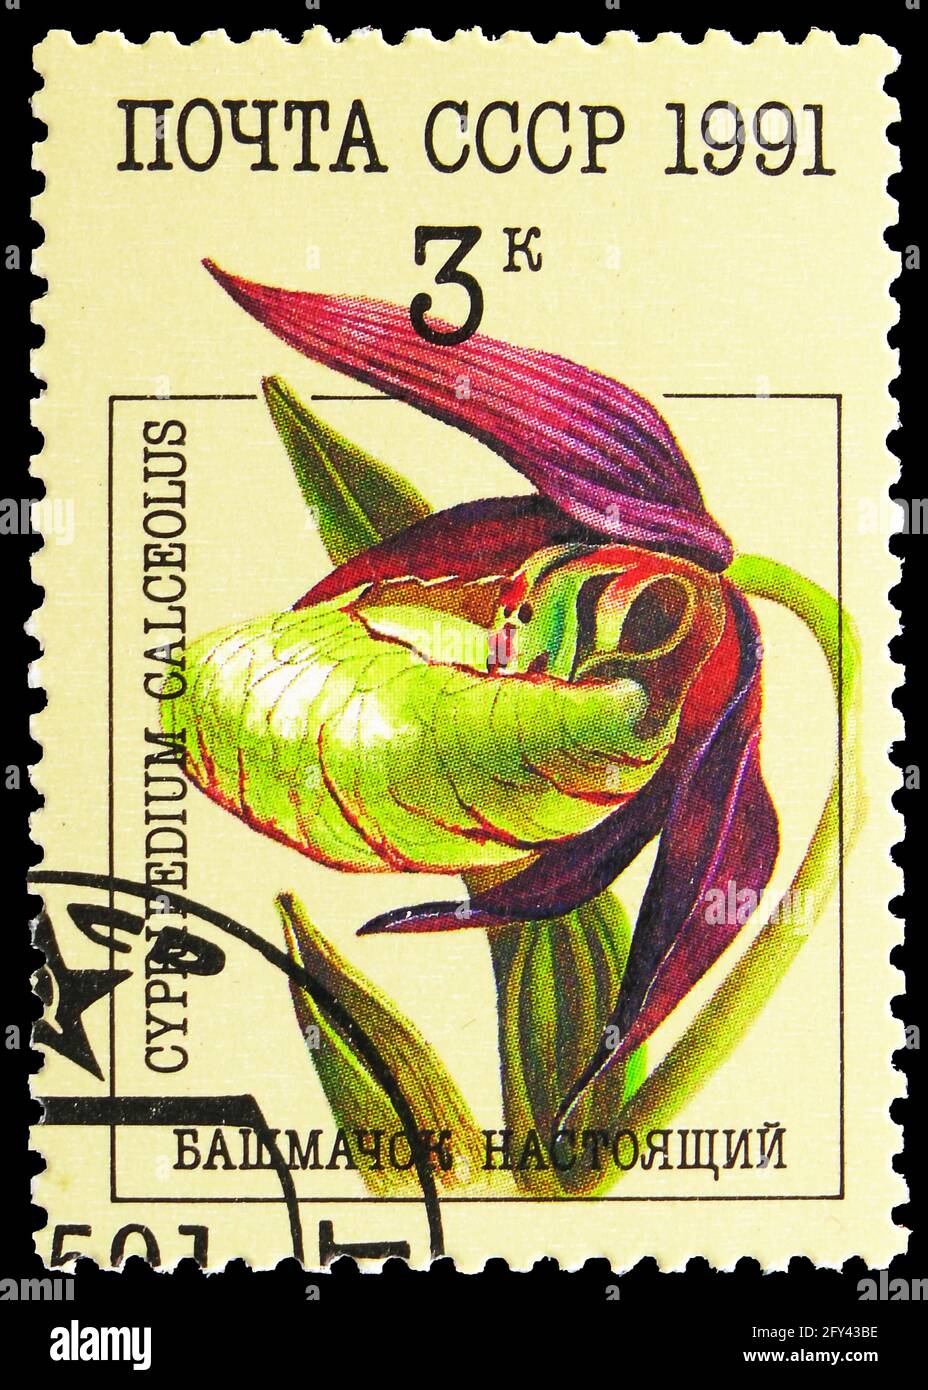 MOSCOW, RUSSIA - AUGUST 31, 2019: Postage stamp printed in Soviet Union (Russia) shows Cypripedium calceolus - Lady's-slipper Orchid, Orchids serie, c Stock Photo